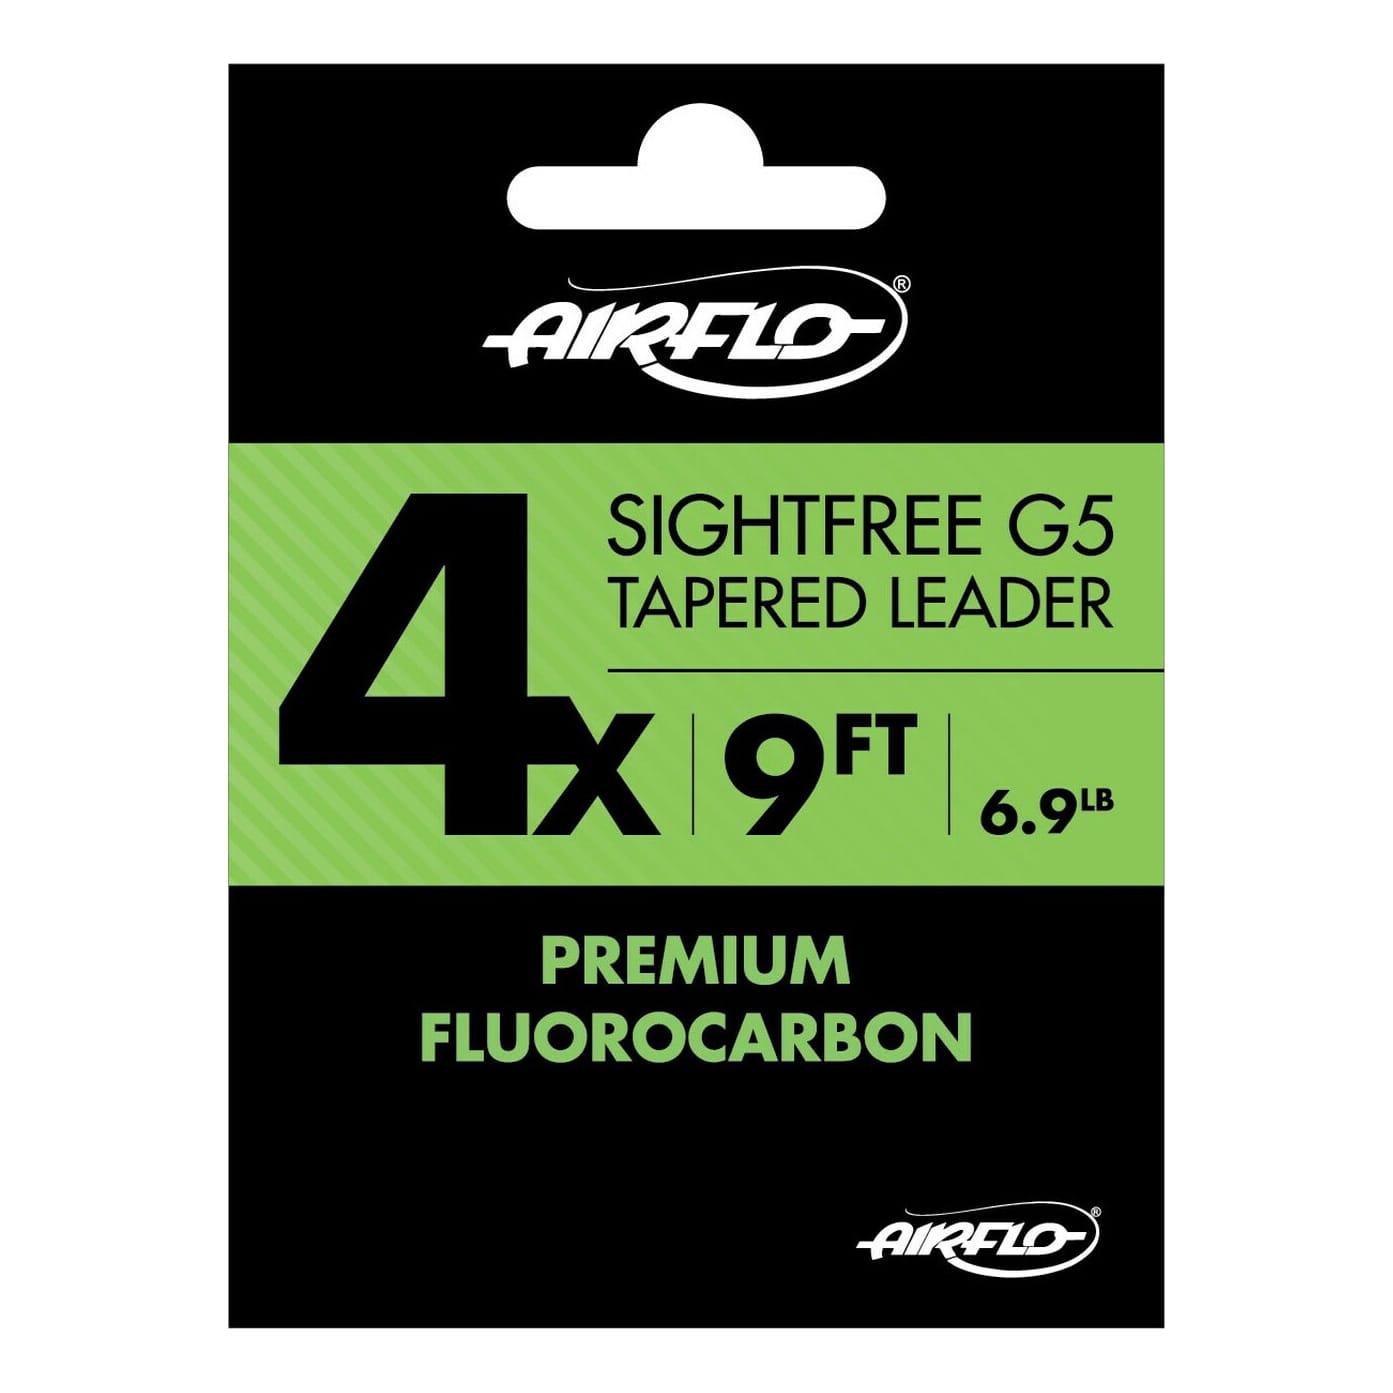 Airflo G5 Fluorocarbon Tapered Leader